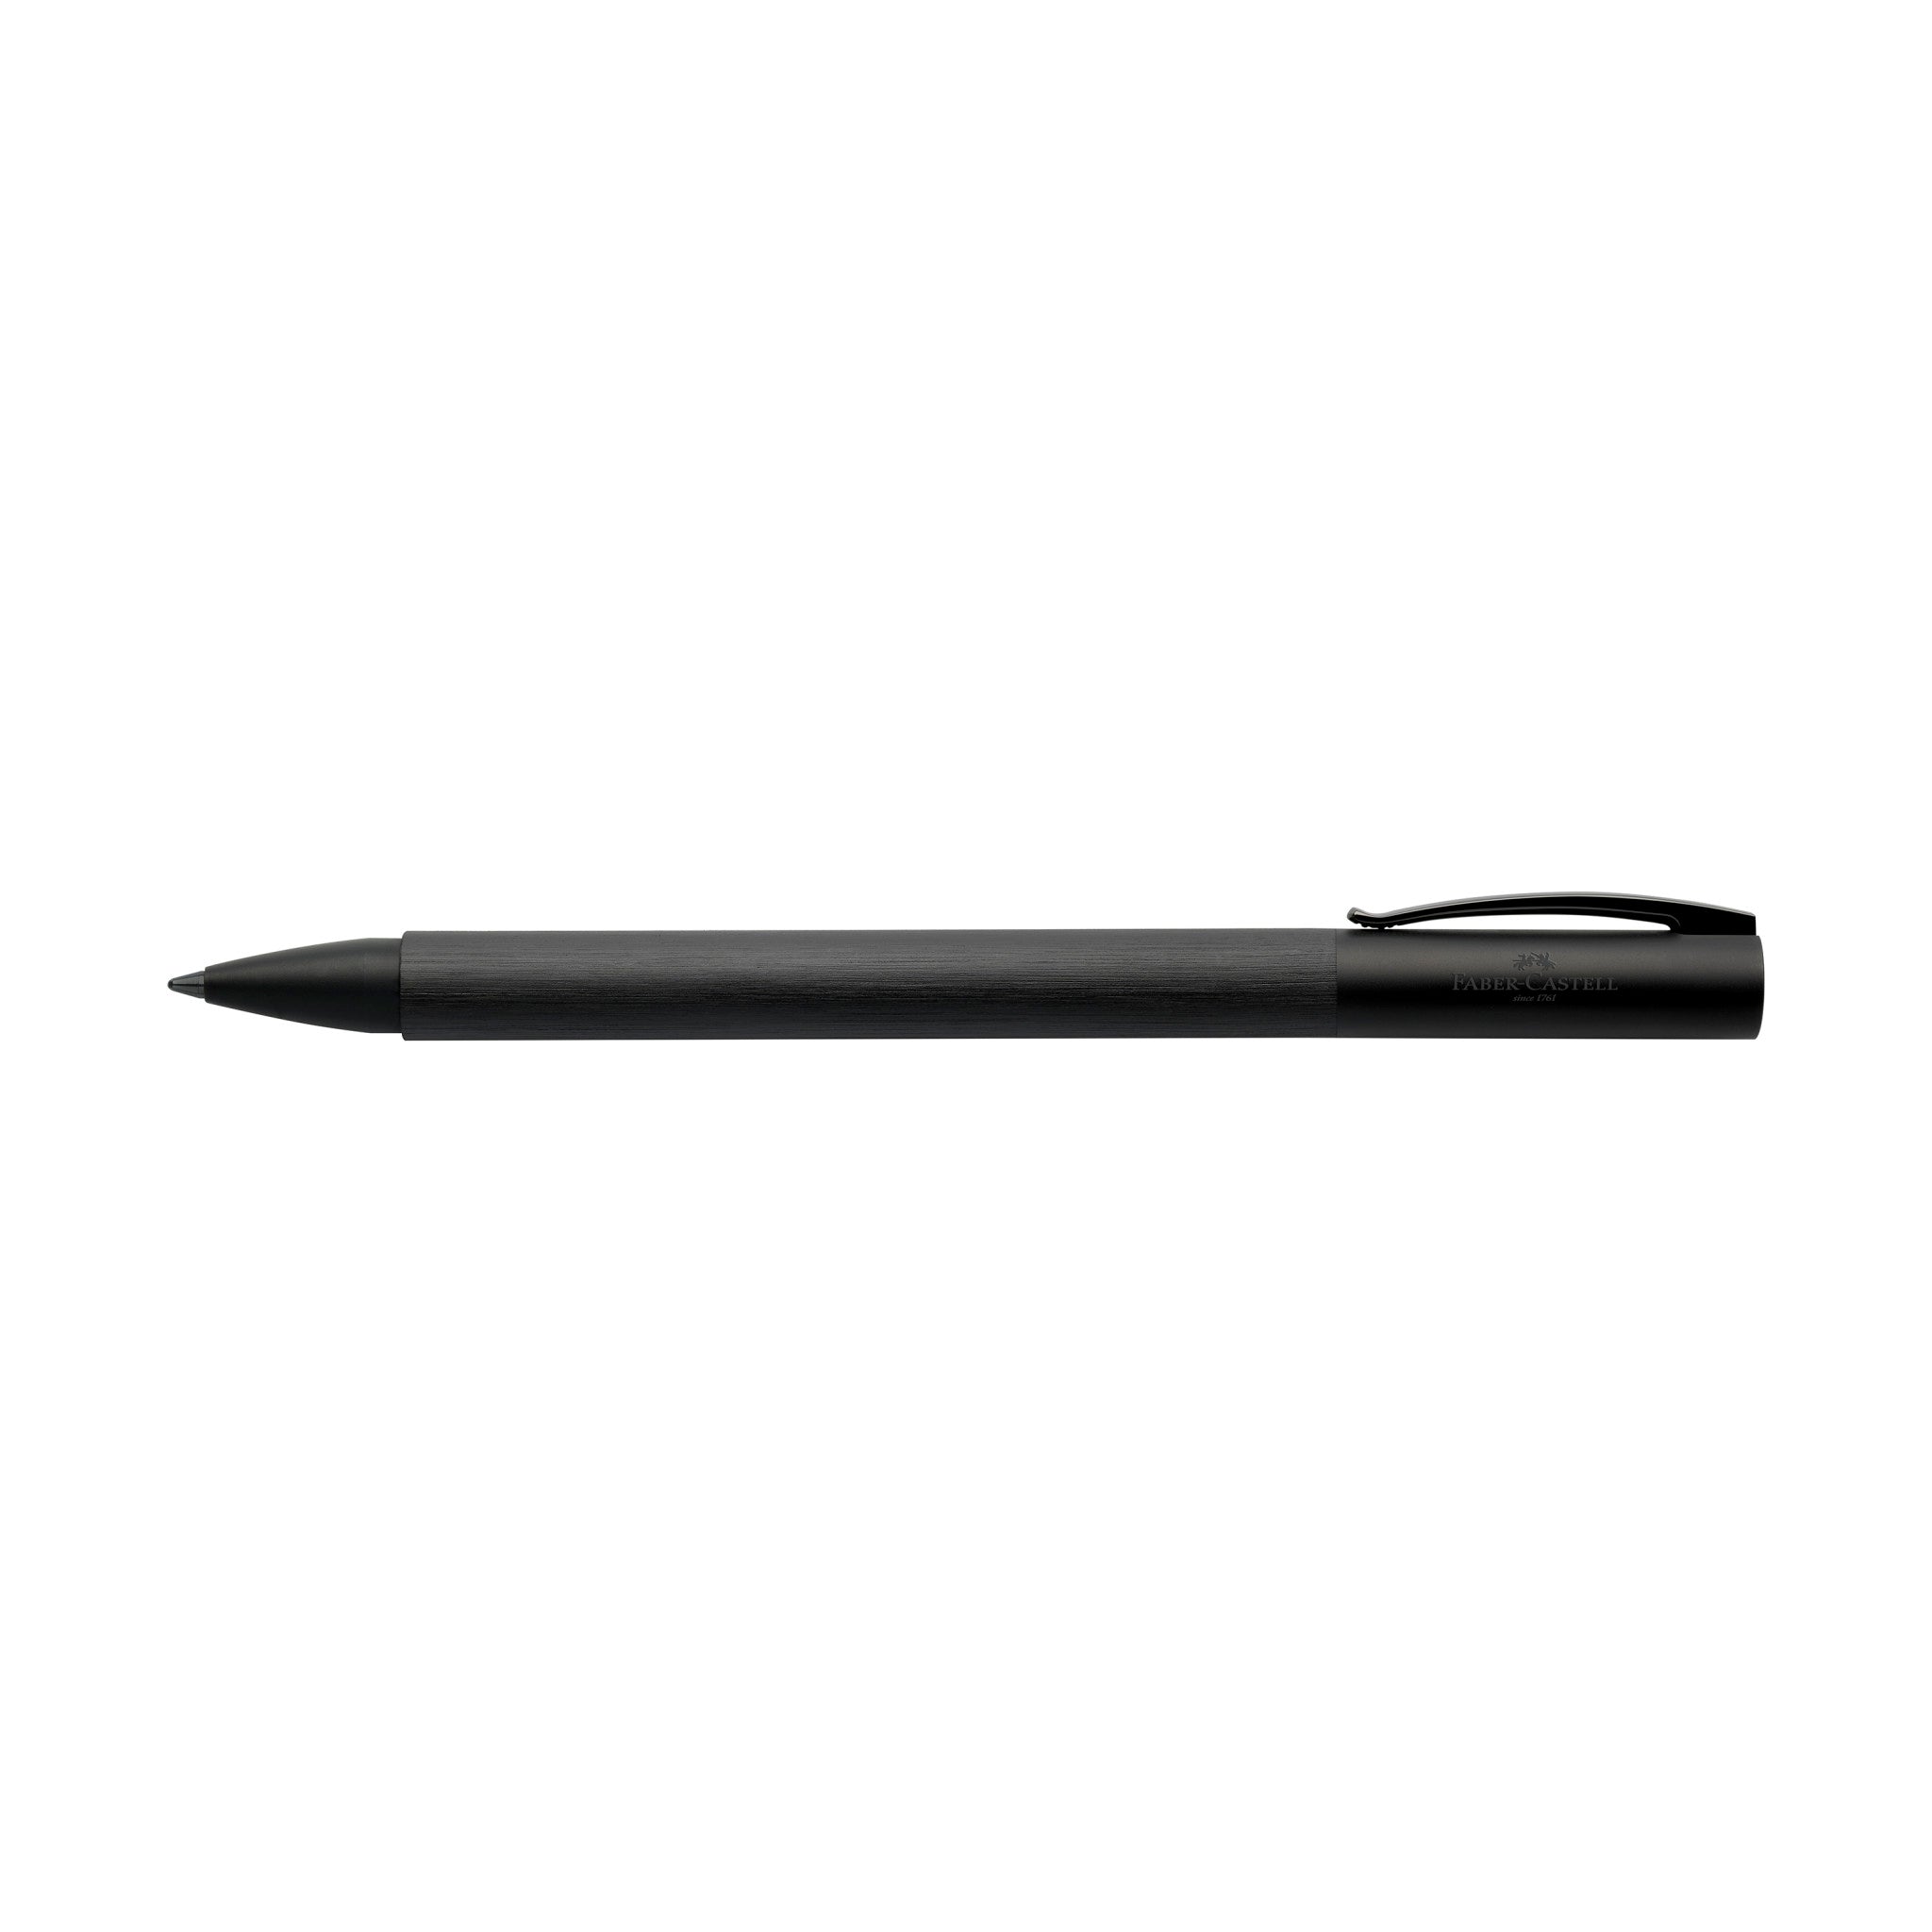 Faber-Castell Ambition All Black LE Ballpoint pen, 147155 - Iguana Sell